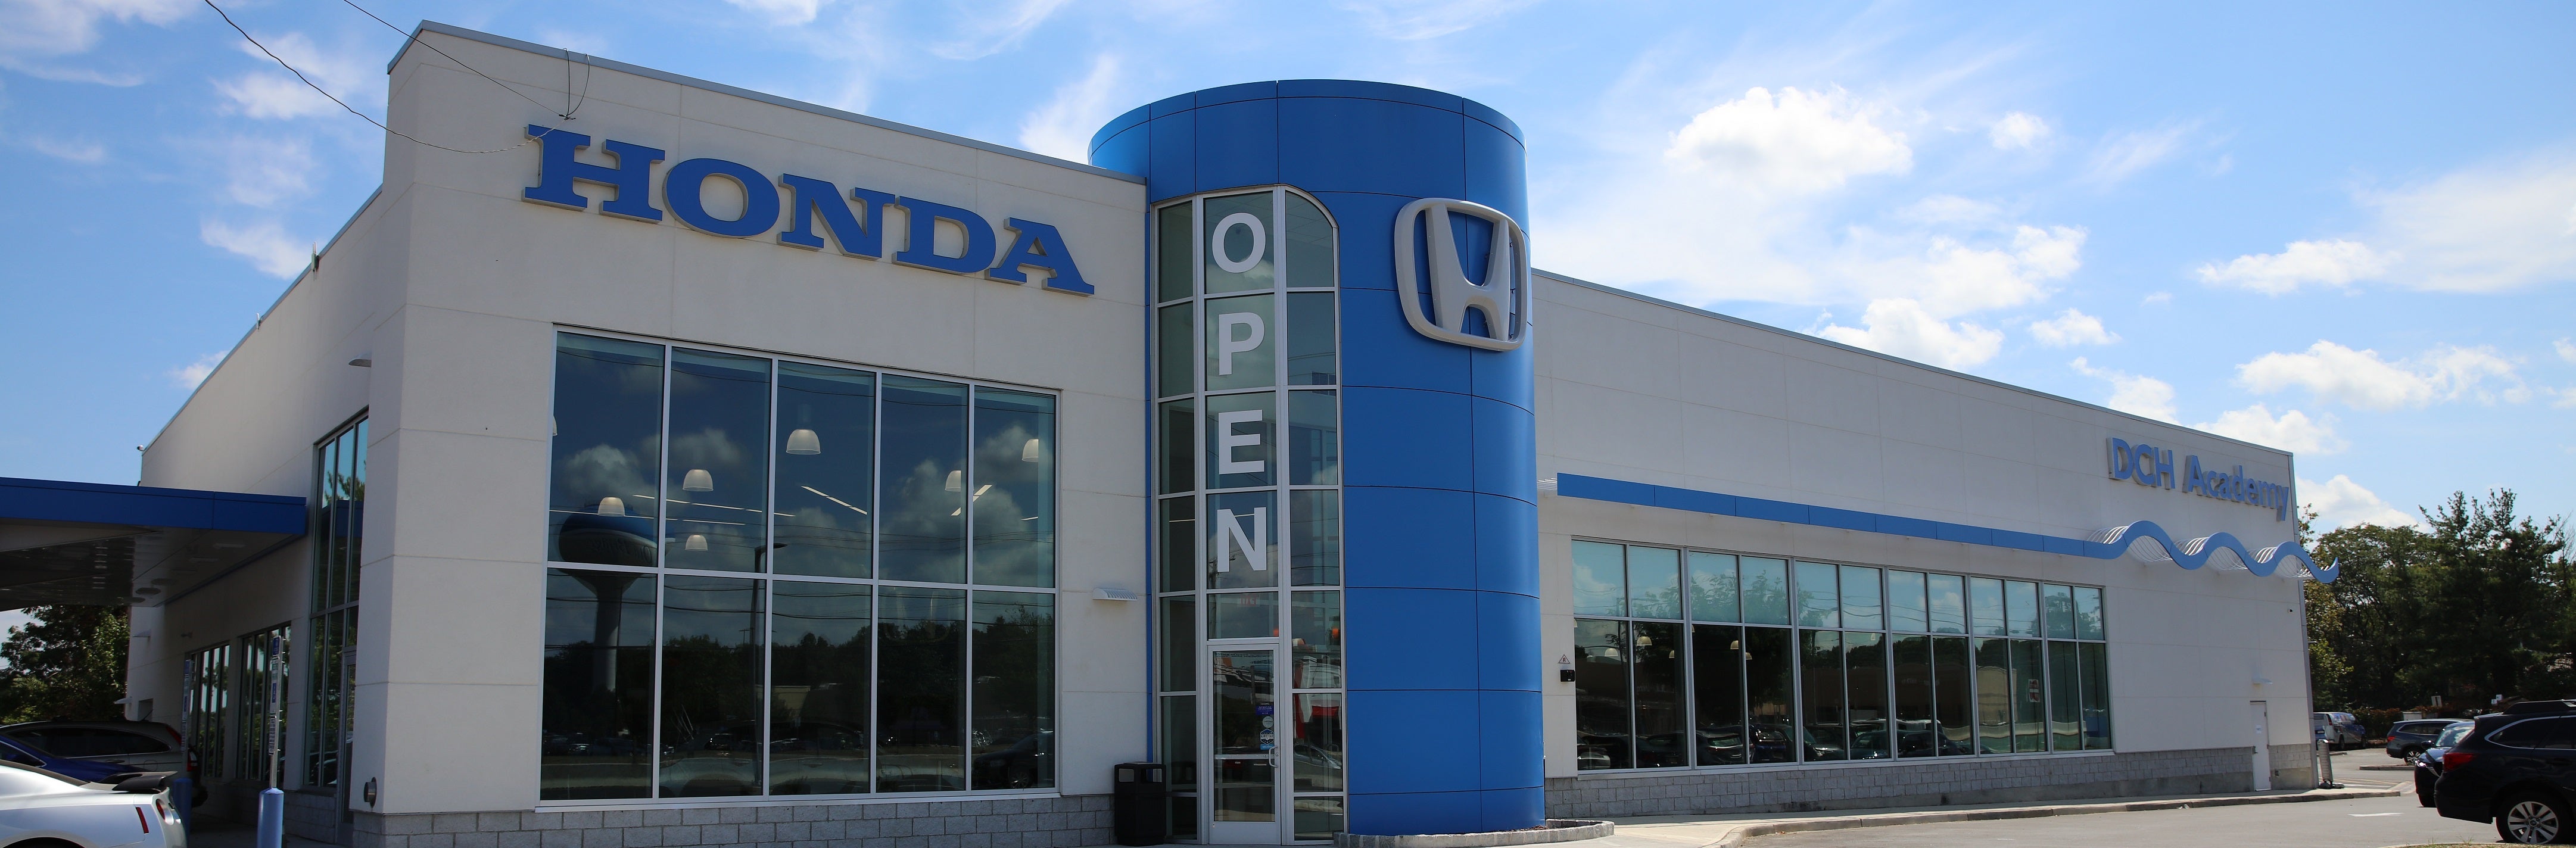 The front of the DCH Academy Honda dealership